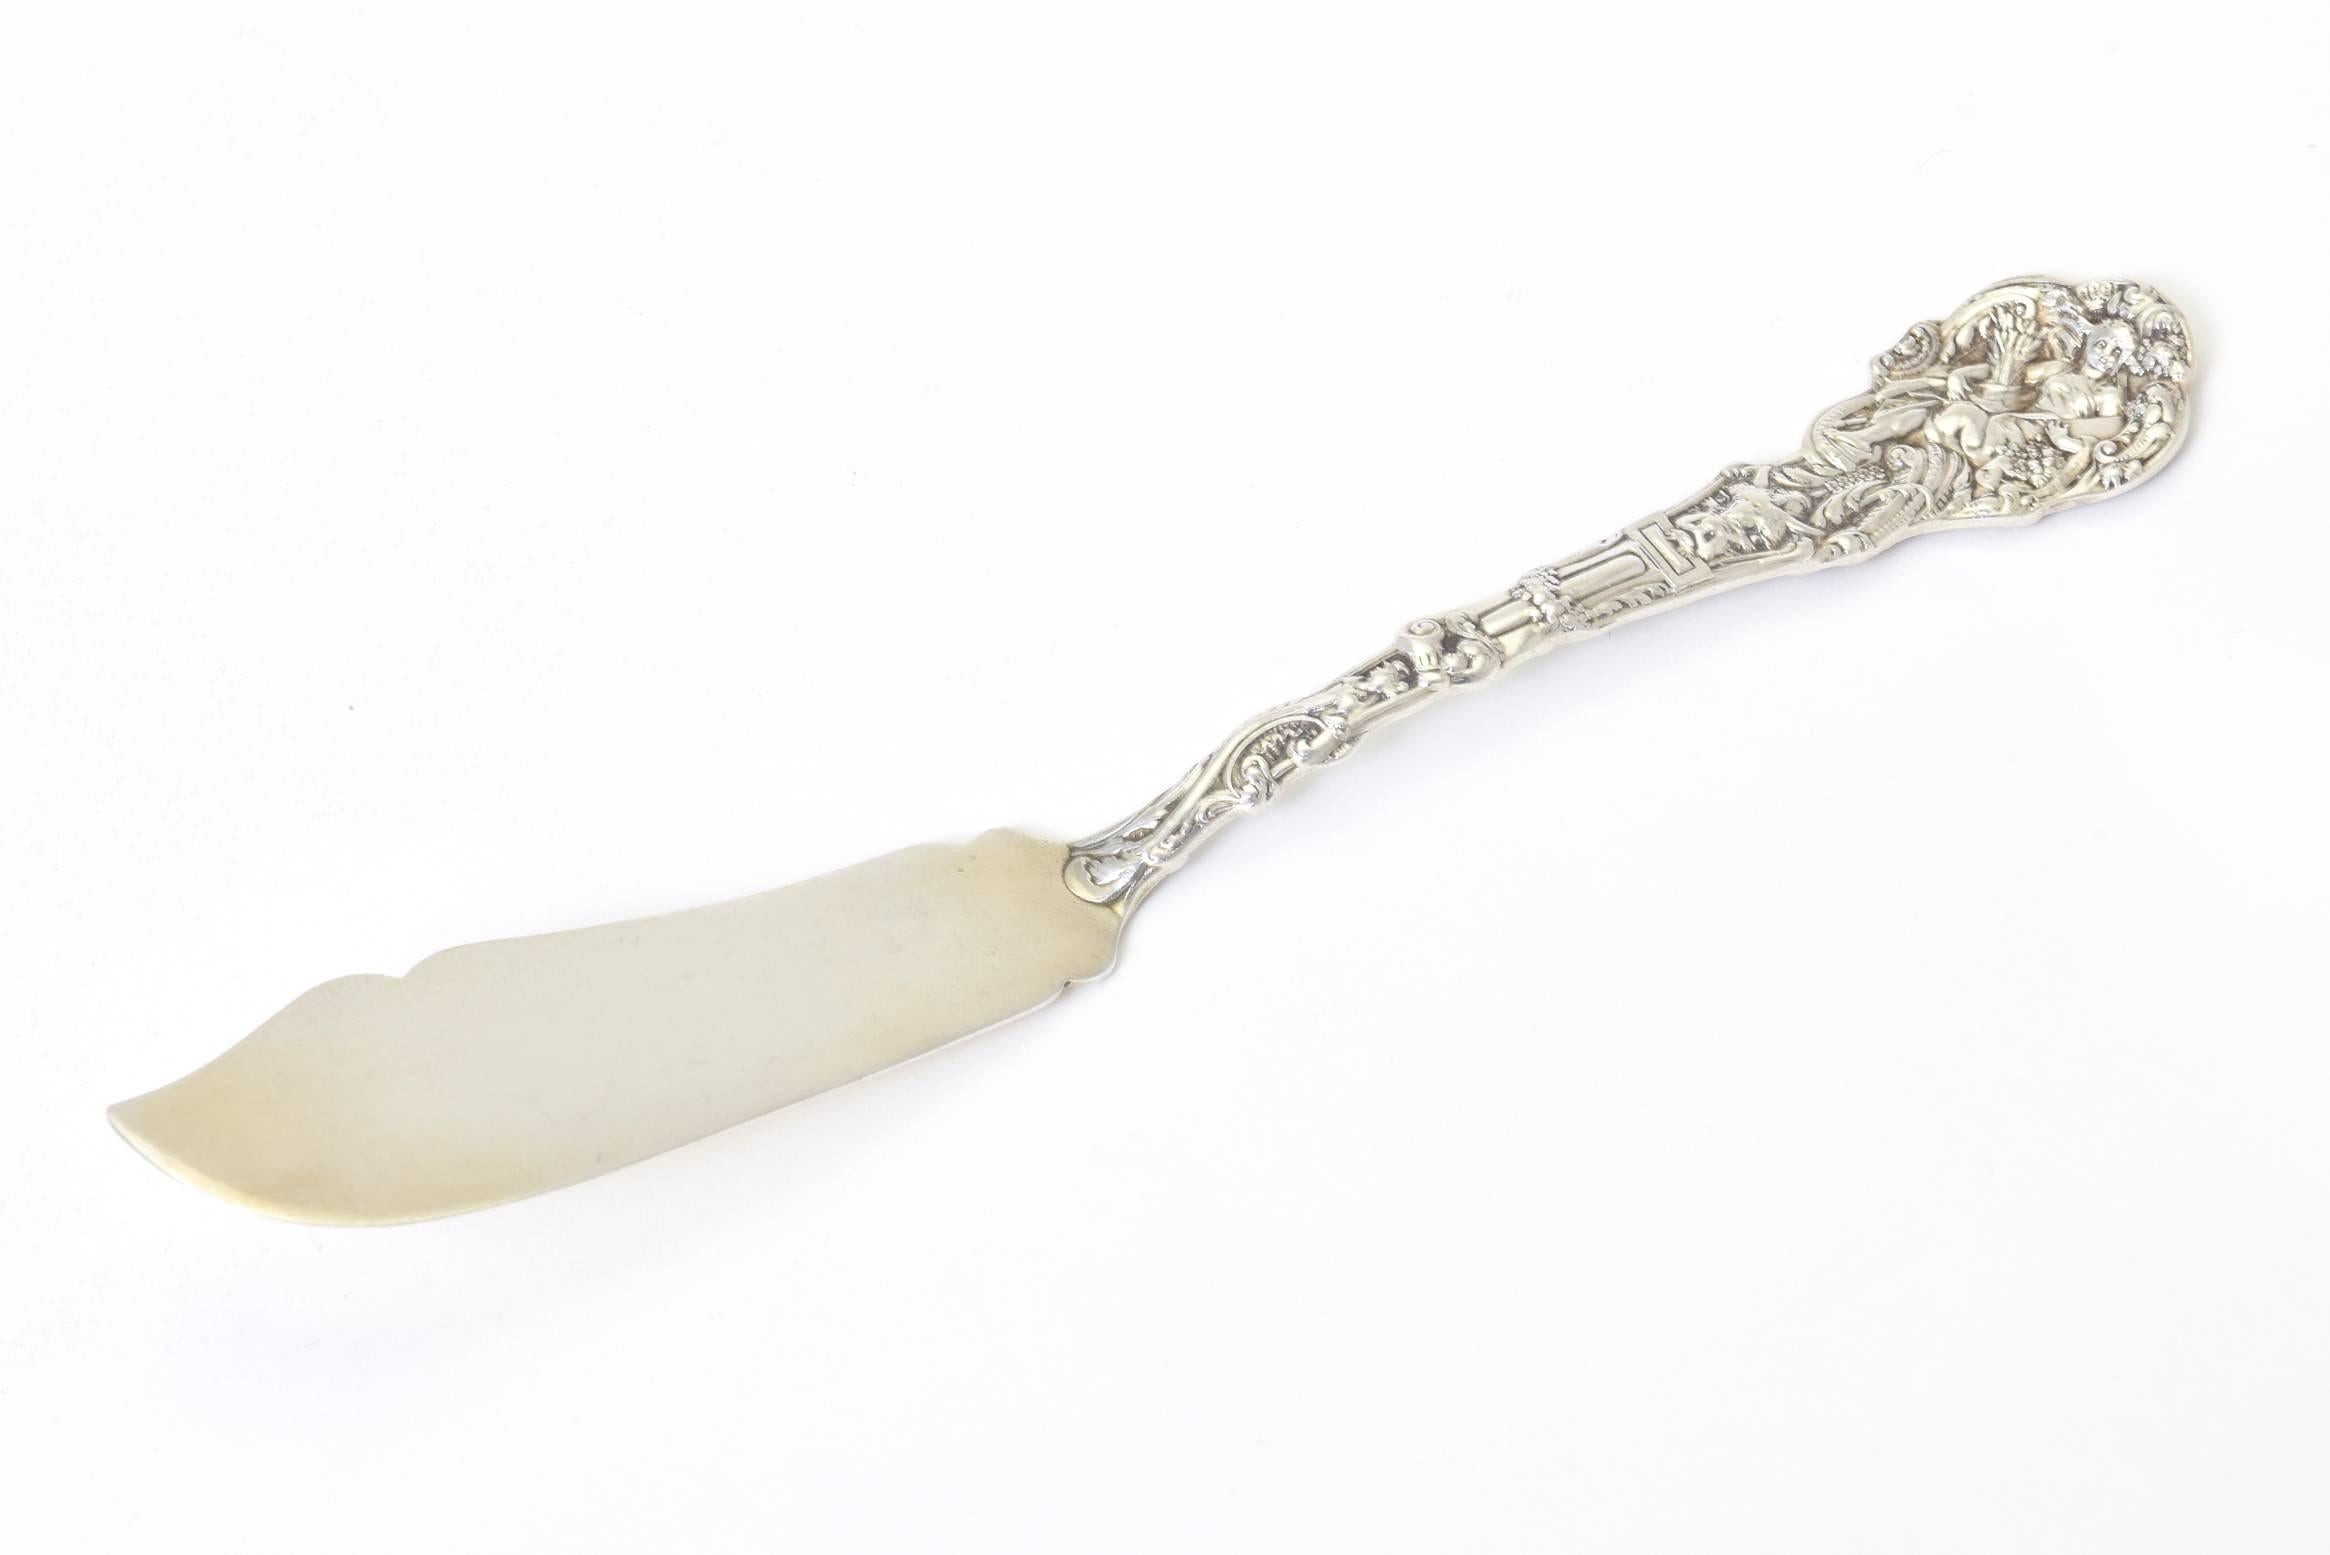 Versailles (Sterling, 1888, No Monograms) by Gorham Silver.
This is an antique Gorham sterling silver master butter knife in the 1888 Versailles pattern. This beautiful art nouveau all sterling knife has a smooth blade and ornate designs on the